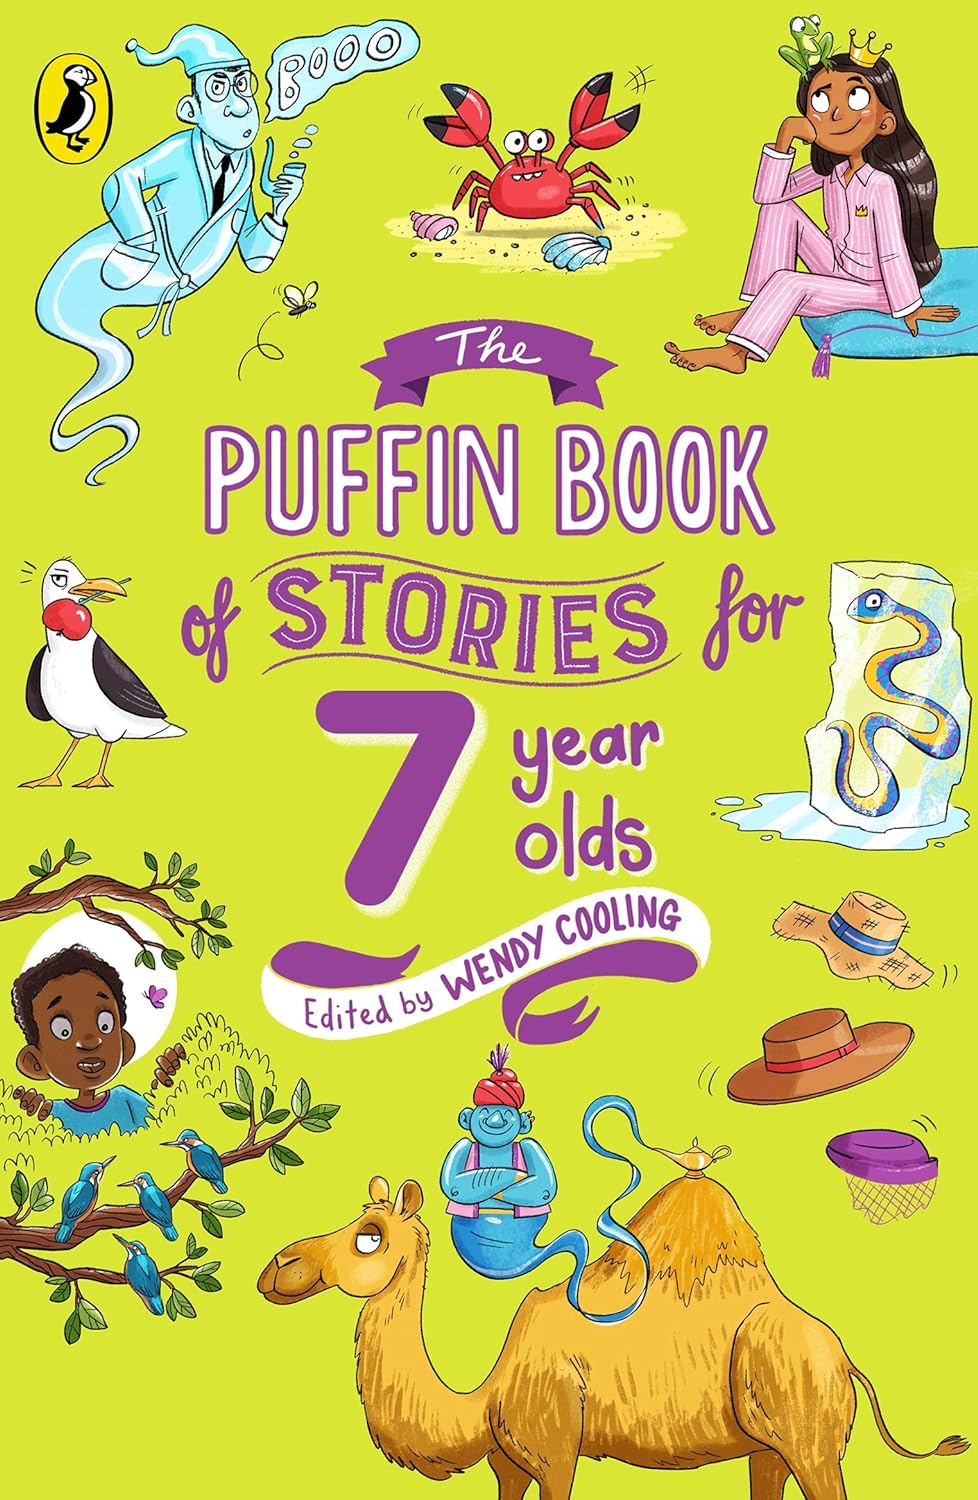 The Puffin Book of Stories for Seven-year-old [Paperback]